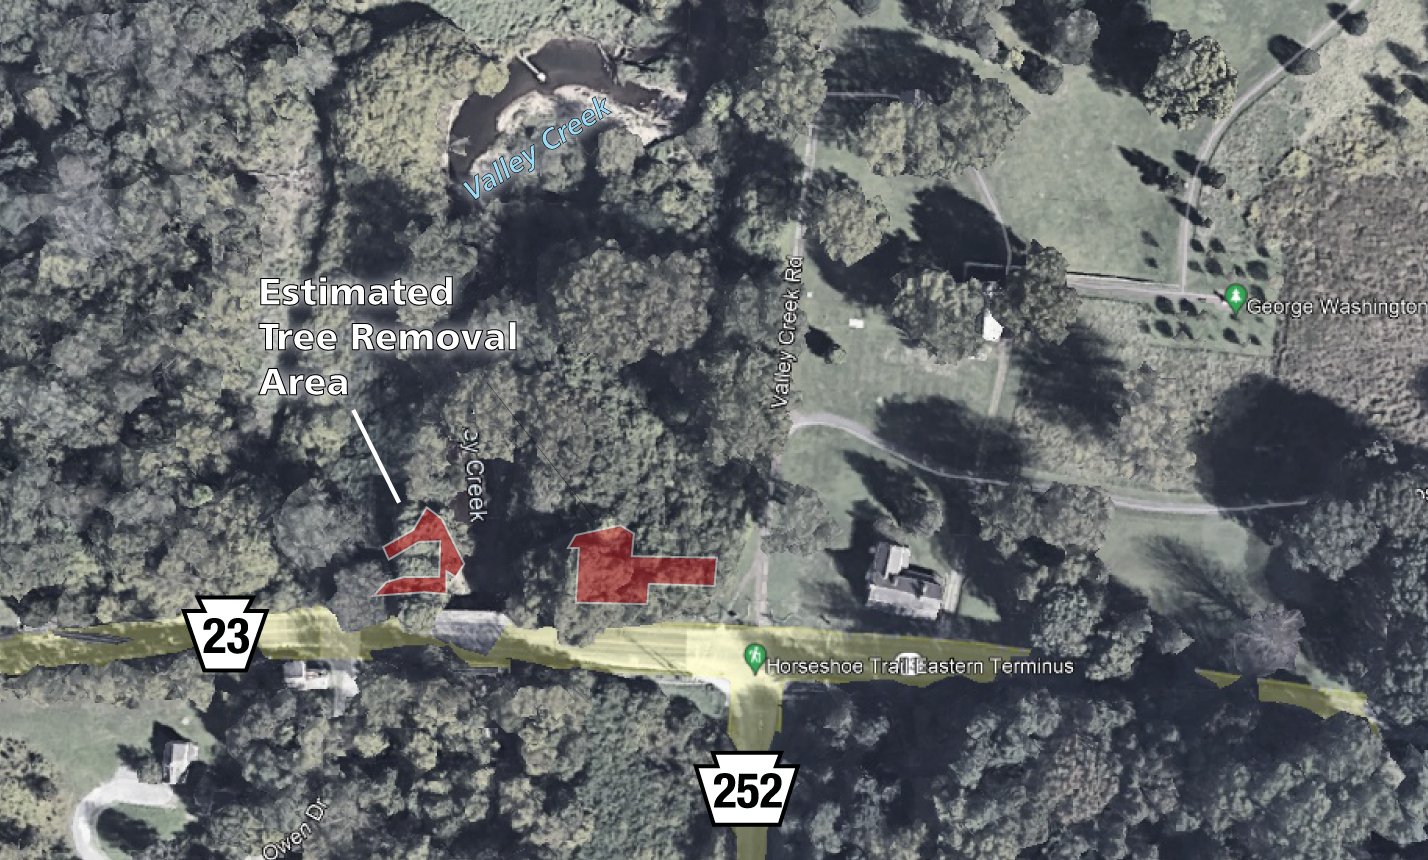 Aerial image showing Rt 23, Rt 252 and Valley Creek. Two red polygons indicate the tree removal area. One polygon is on each side of Valley Creek.